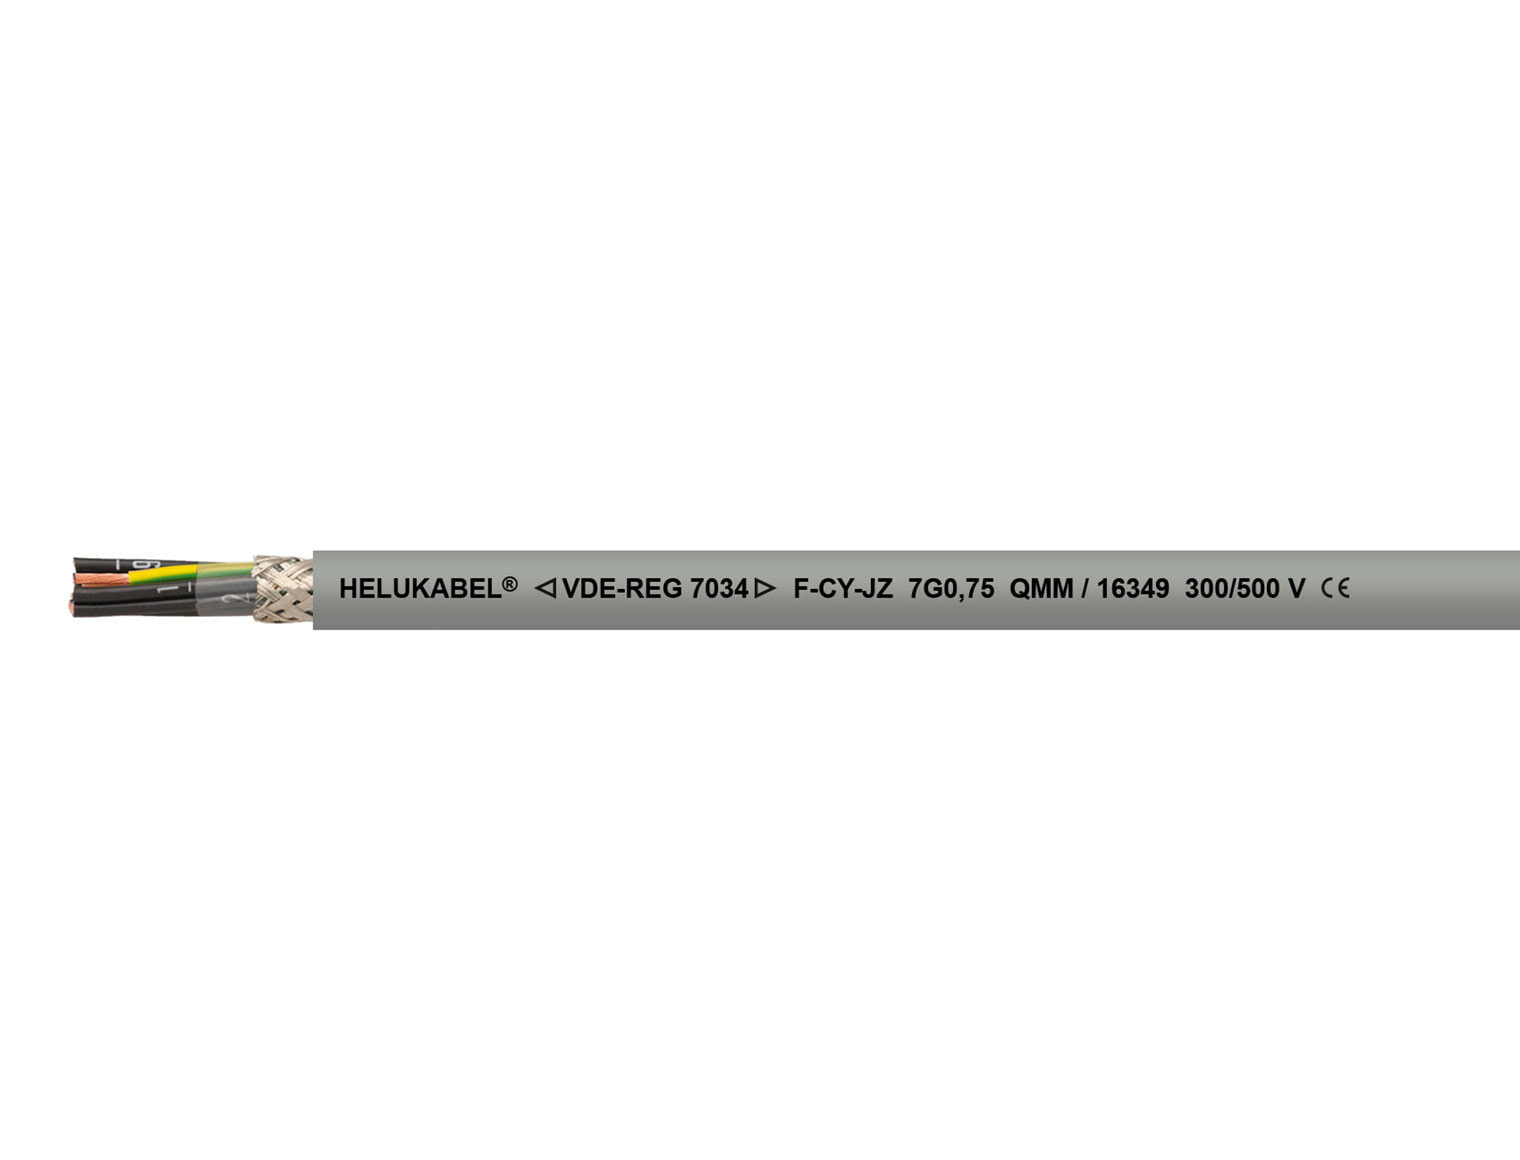 Helukabel F-CY-OZ - Low voltage cable - Grey - Polyvinyl chloride (PVC) - Polyvinyl chloride (PVC) - Cooper - -10 - 80 °C